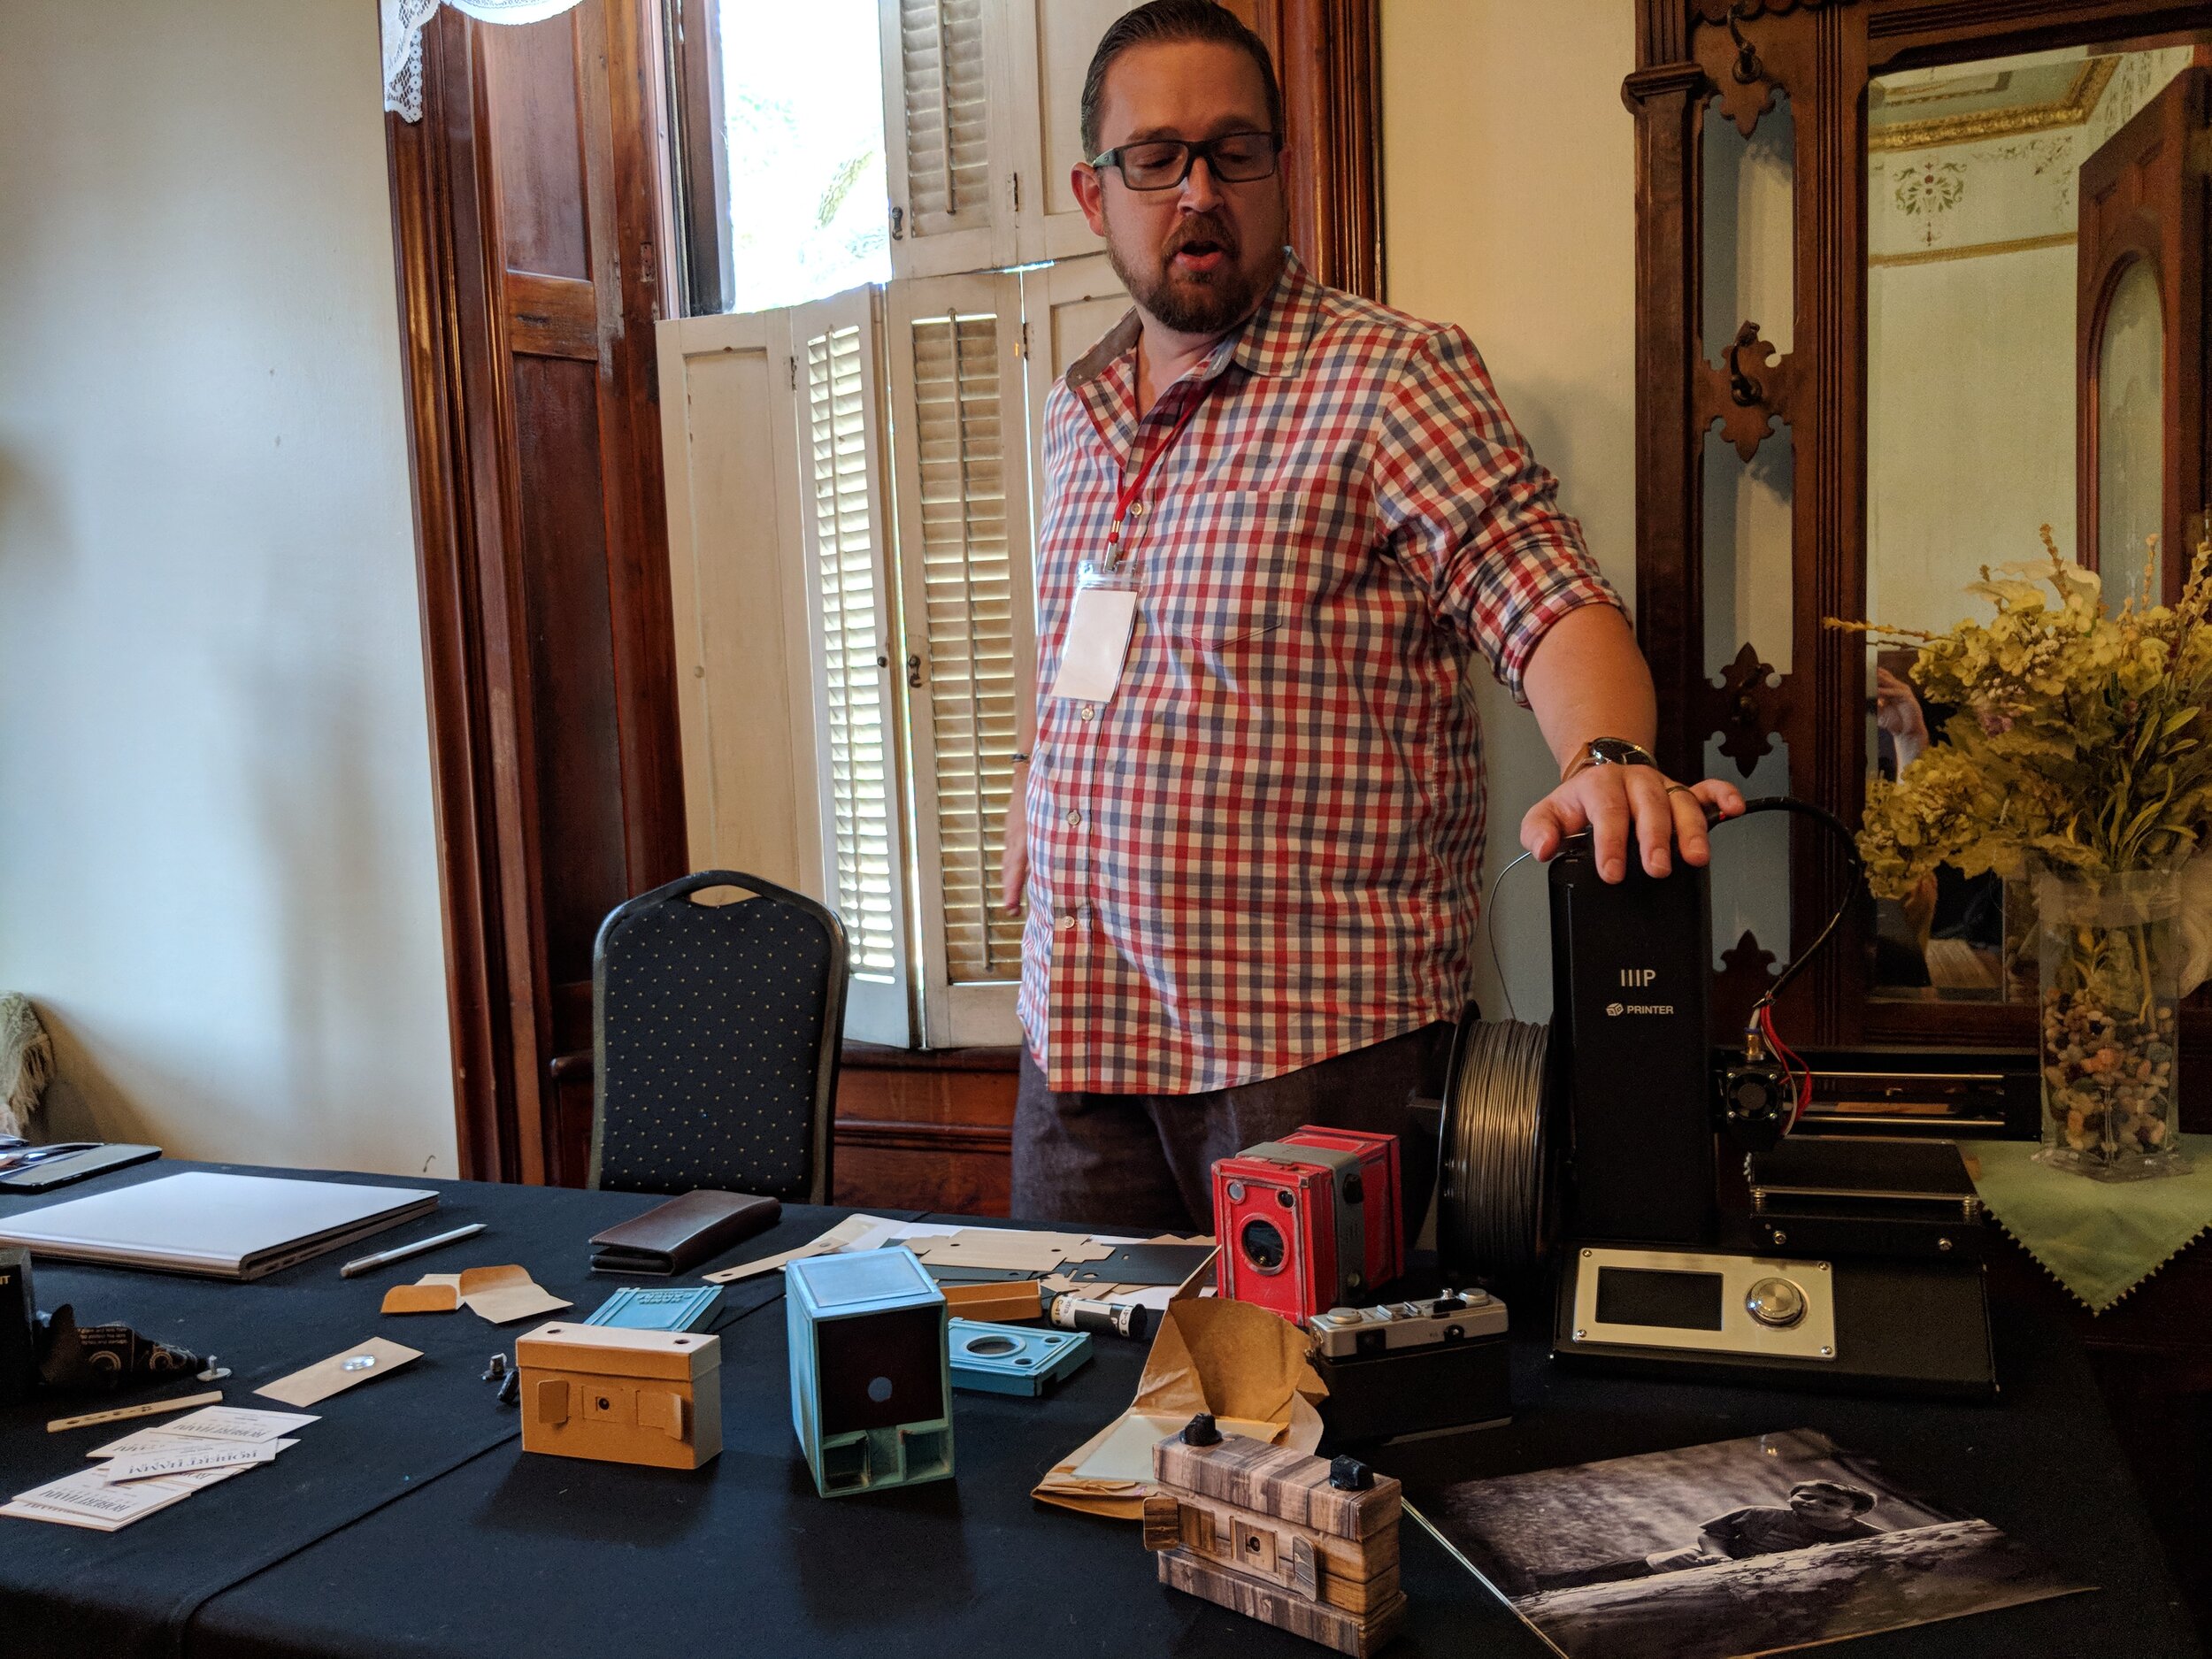 Rob Hamm discusses 3D printing and product manufacturing